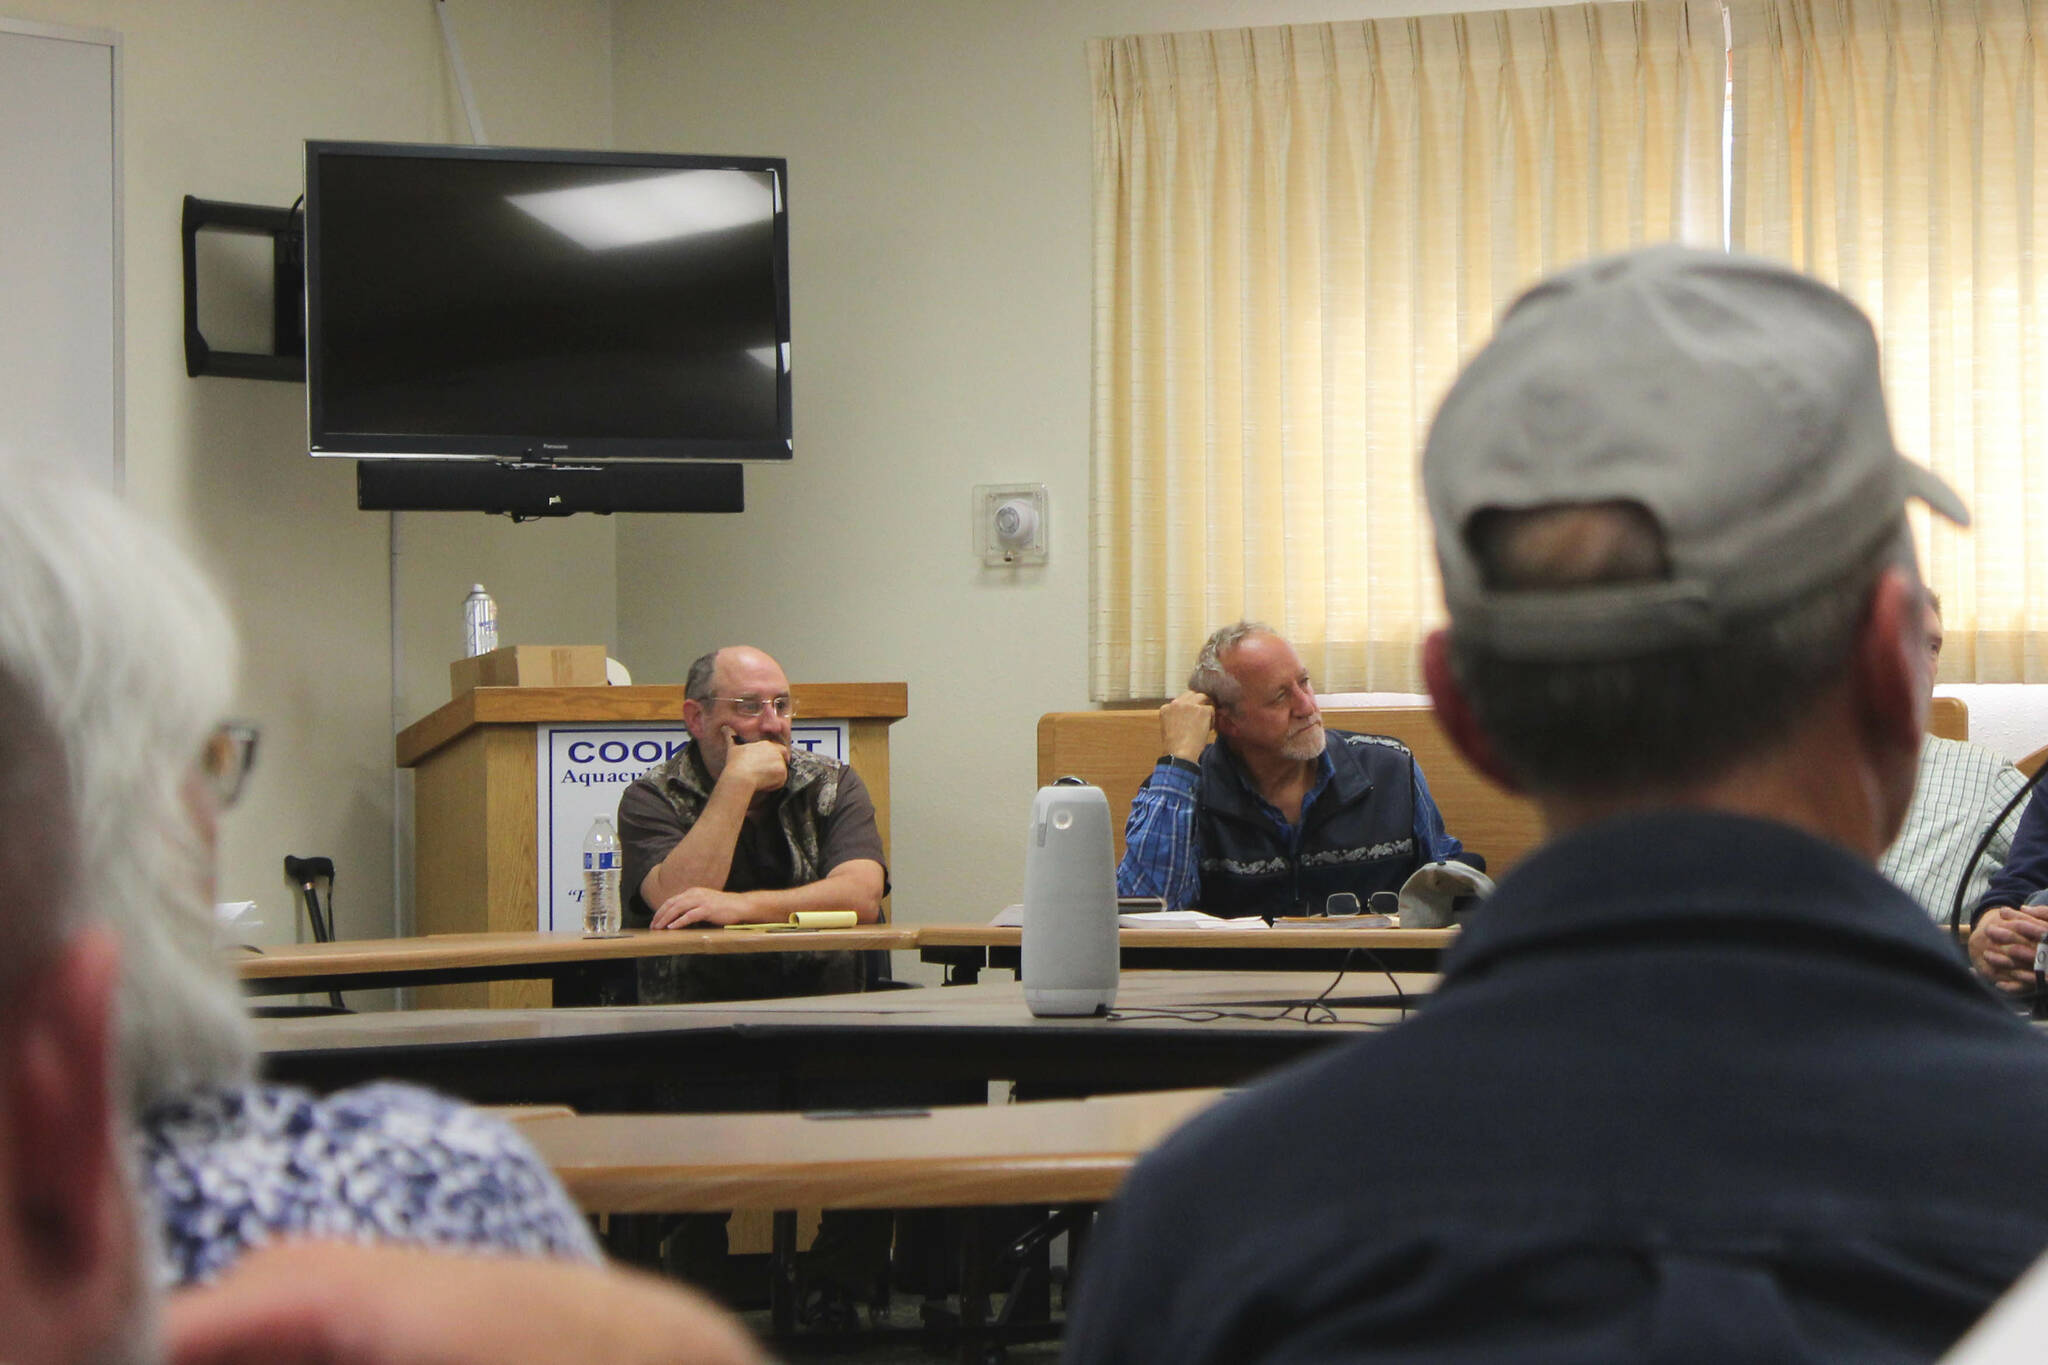 Alaska Department of Fish and Game Commissioner Doug Vincent-Lang, right, listens to east side setnet fisherman at the Cook Inlet Aquaculture Association building on Tuesday, Aug. 2, 2022, near Kenai, Alaska. (Ashlyn O’Hara/Peninsula Clarion)